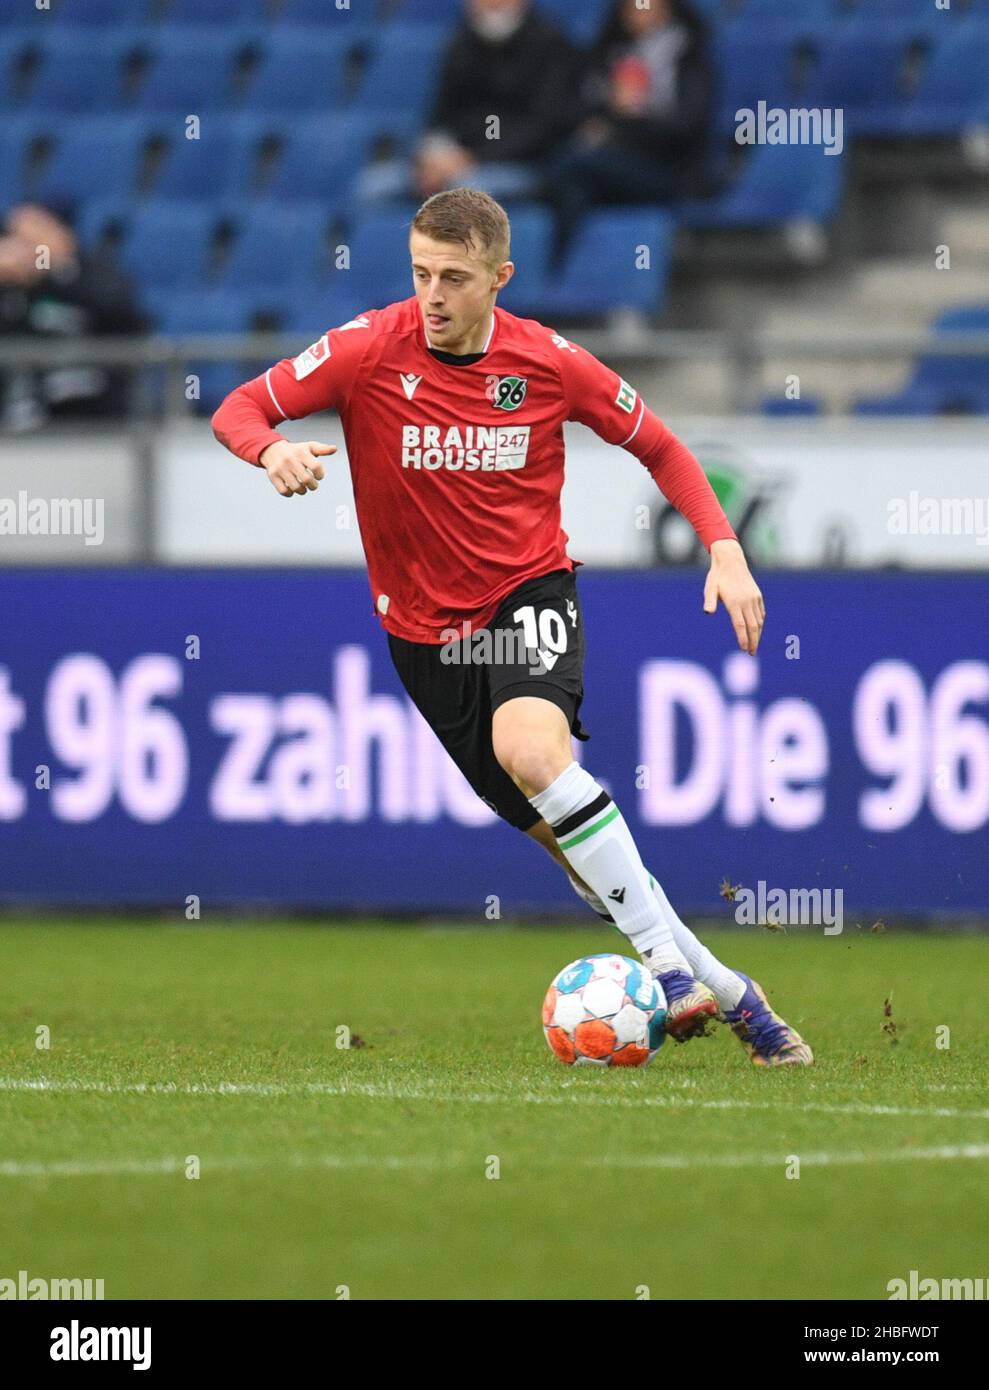 Hanover, Germany. 19th Dec, 2021. Football: 2nd Bundesliga, Matchday 18: Hannover 96 - Werder Bremen at the HDI Arena. Hannover's Sebastian Ernst plays the ball. Credit: Daniel Reinhardt/dpa - IMPORTANT NOTE: In accordance with the regulations of the DFL Deutsche Fußball Liga and/or the DFB Deutscher Fußball-Bund, it is prohibited to use or have used photographs taken in the stadium and/or of the match in the form of sequence pictures and/or video-like photo series./dpa/Alamy Live News Stock Photo